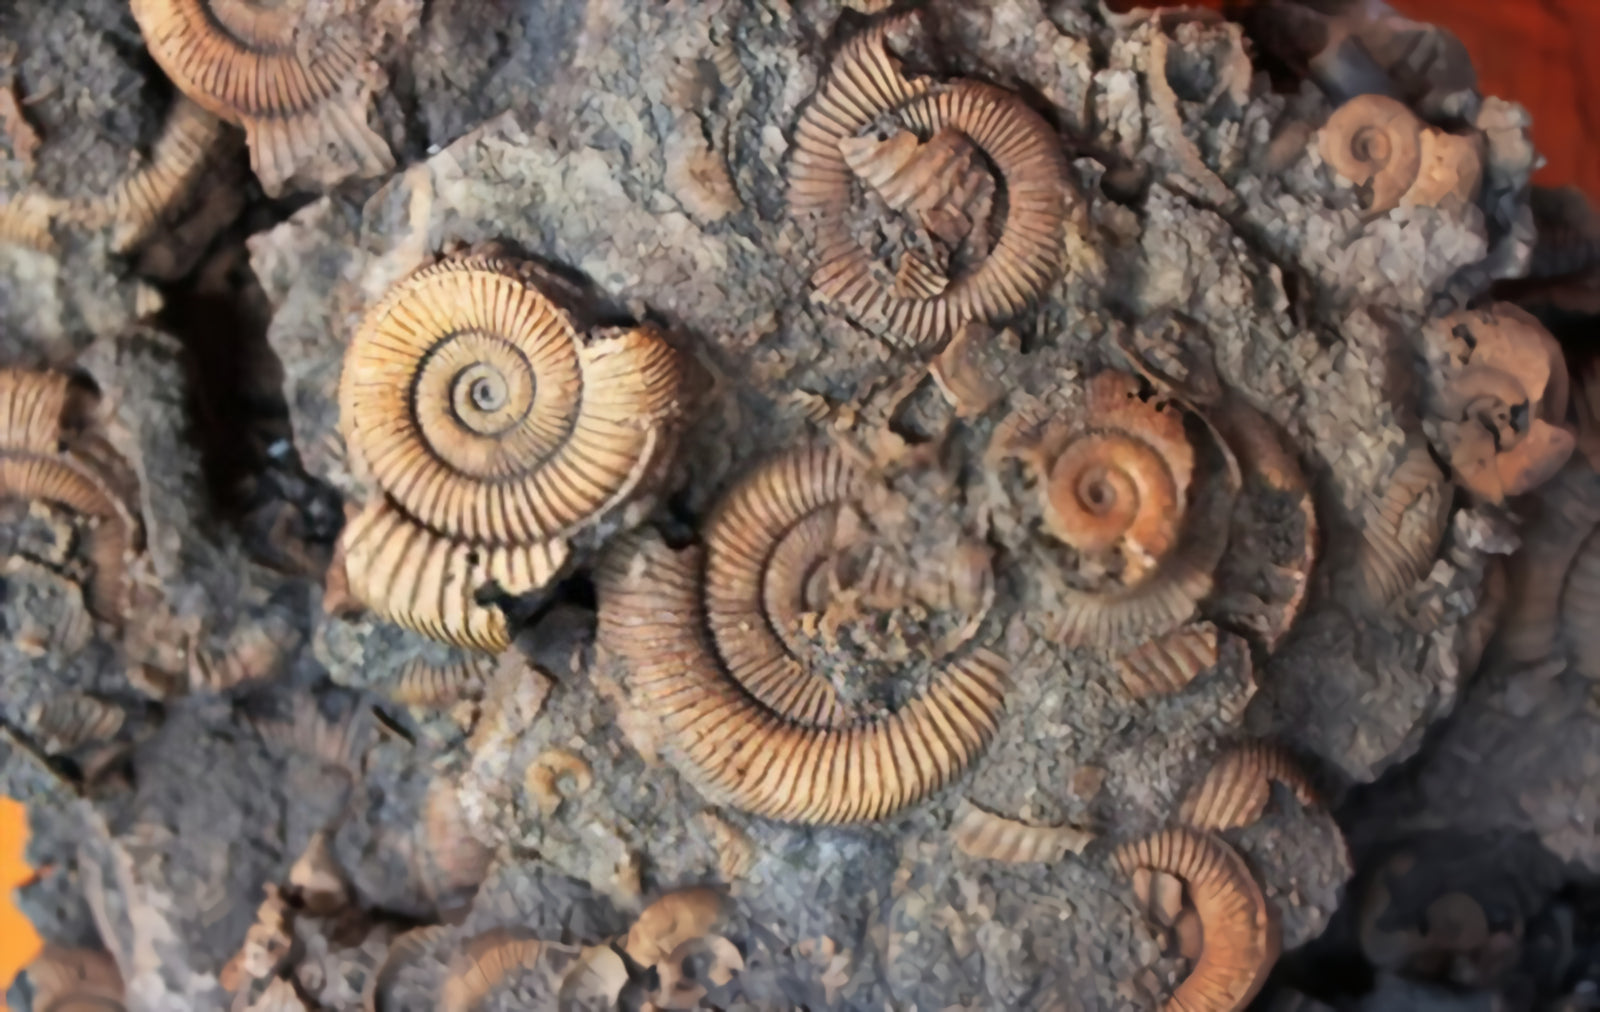 How does something become fossilized?